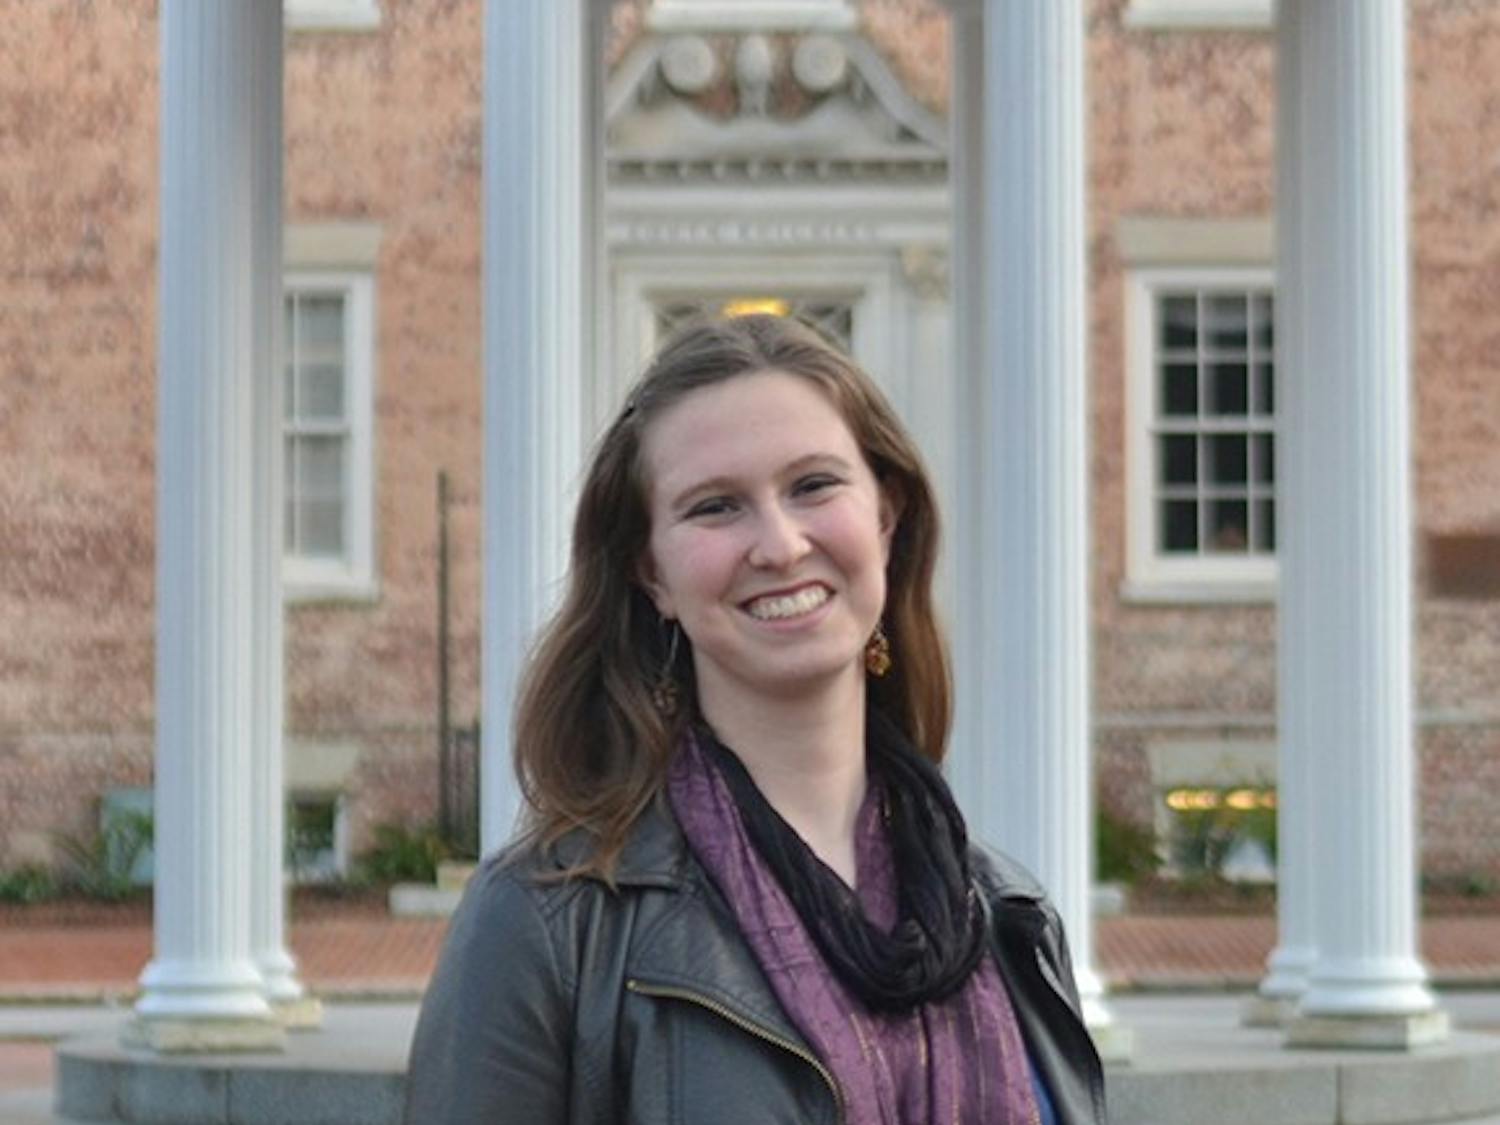 2-5 - Anna Barson - UNC Music major Anna Barson created a petition on change.org to include a college student on the White House Task Force to Protect Students from Sexual Assault. The deadline for the petition to reach 100,000 signatures is March 1st.